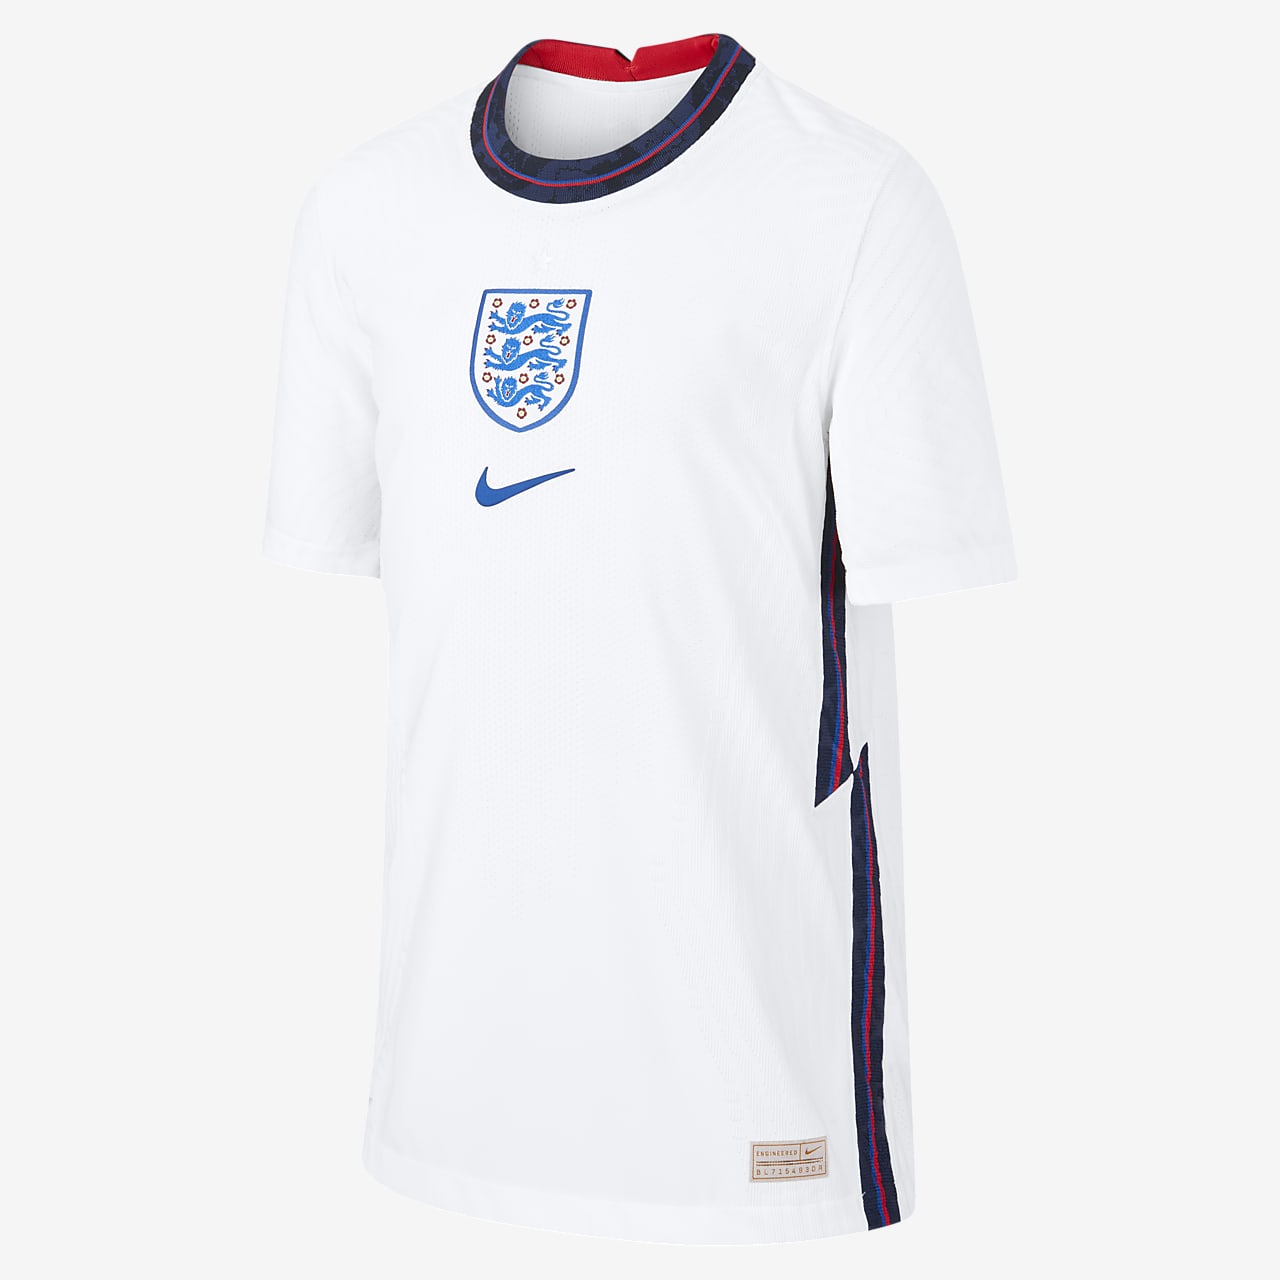 England Football Kit - England S Umbro Football Kits In Pictures ...